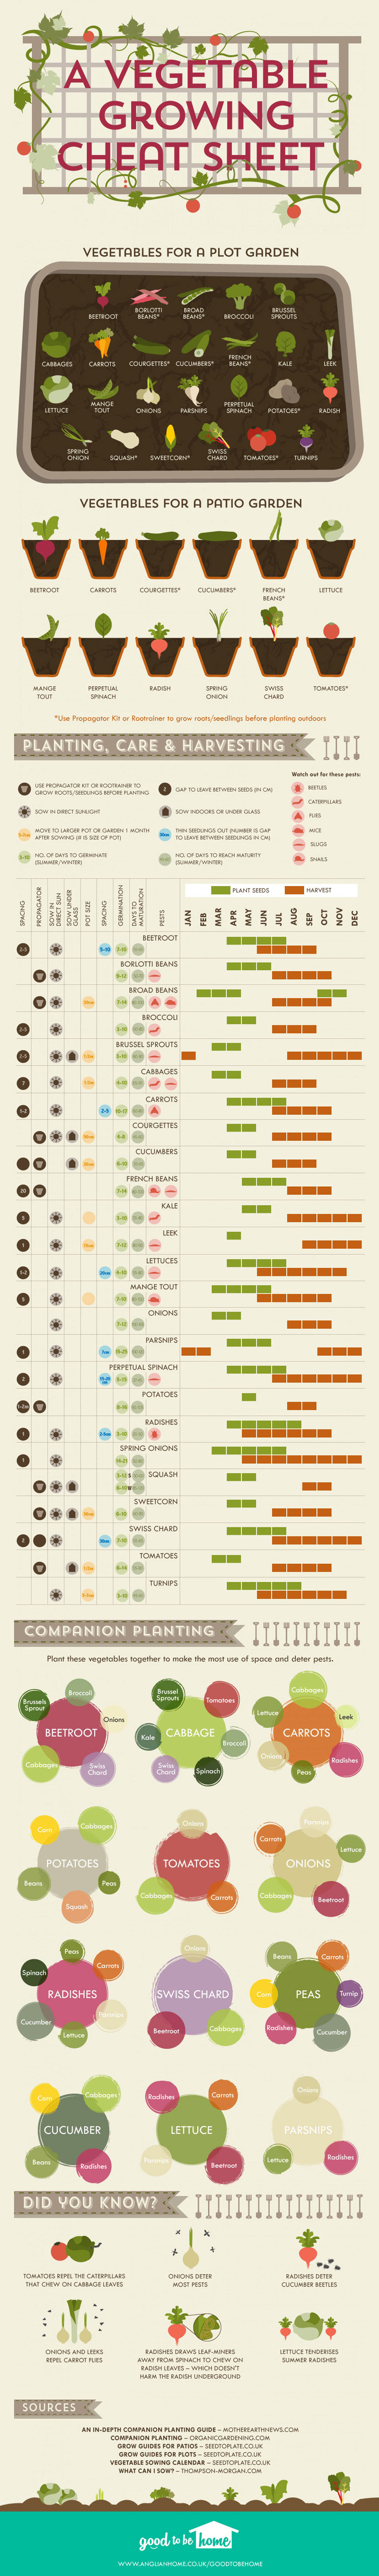 Vegetable Growing Cheat Sheet Infographic